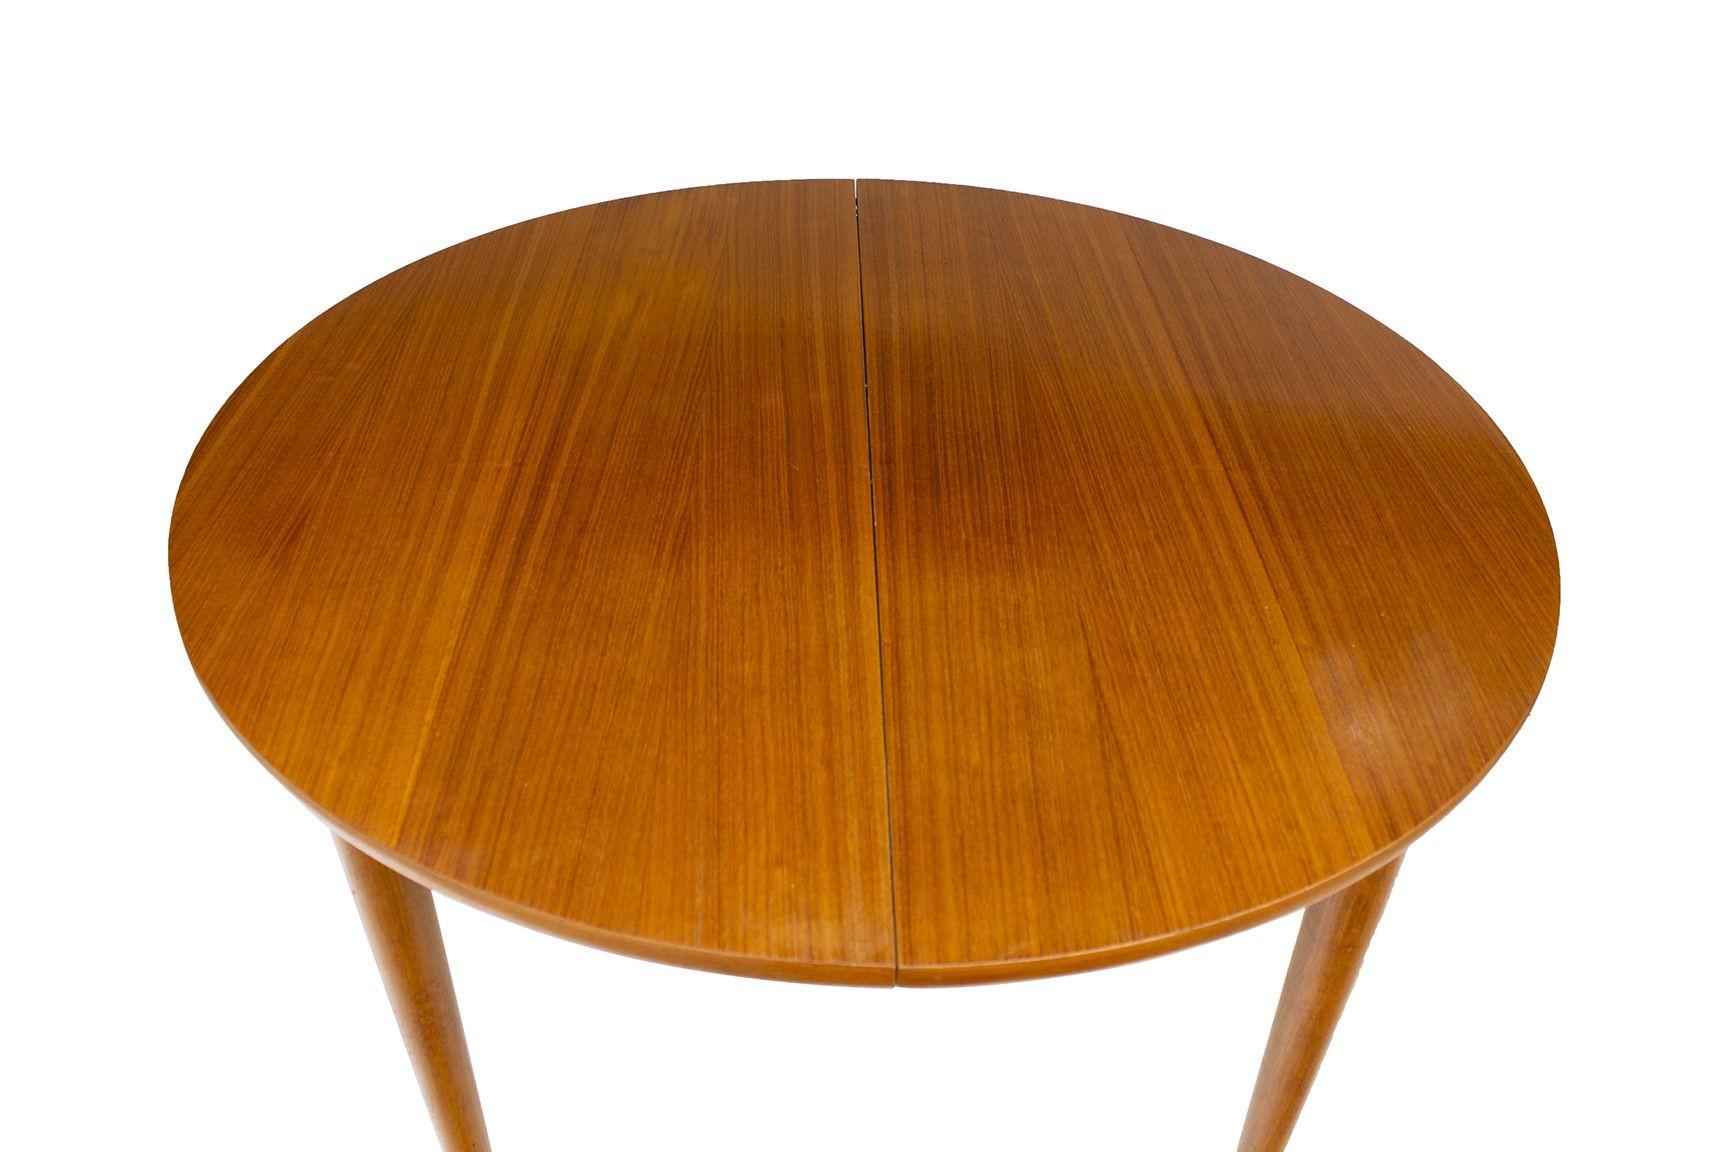 Likely Denmark or Sweden, 1960s
Round Scandinavian Teak Dining Table with Butterfly Leaf. Minimalist design though with subtle details. Great usable size, and adjustable via the pop-up, self-storing leaf. 
DIMENSIONS: 45 1/8